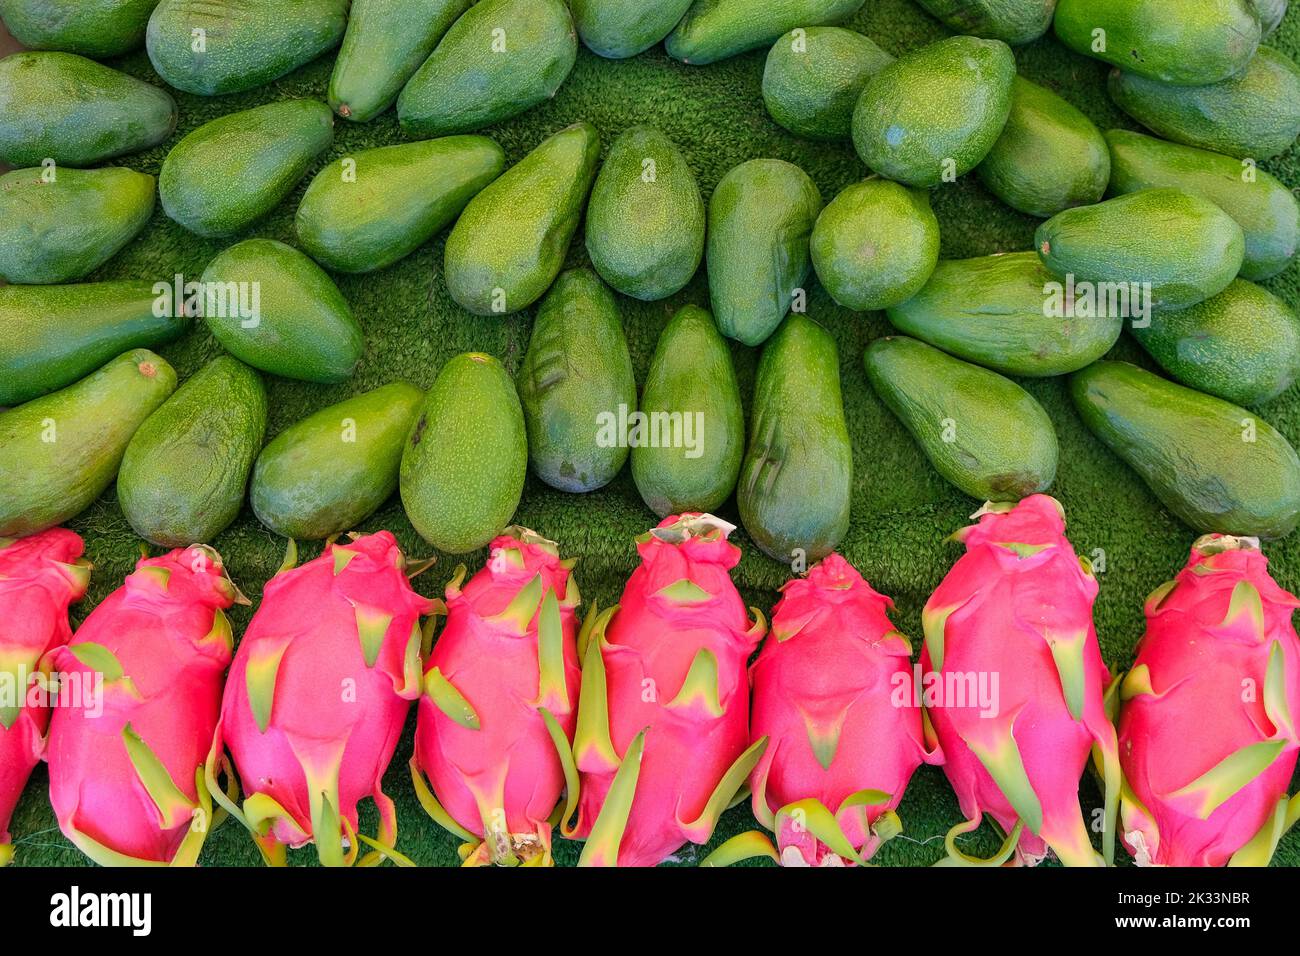 Pile of pitaya or dragon fruit, Big Bunch of Pink Dragon Fruits and green organic avocado in the market, in traditional Market, Copy space. Stock Photo